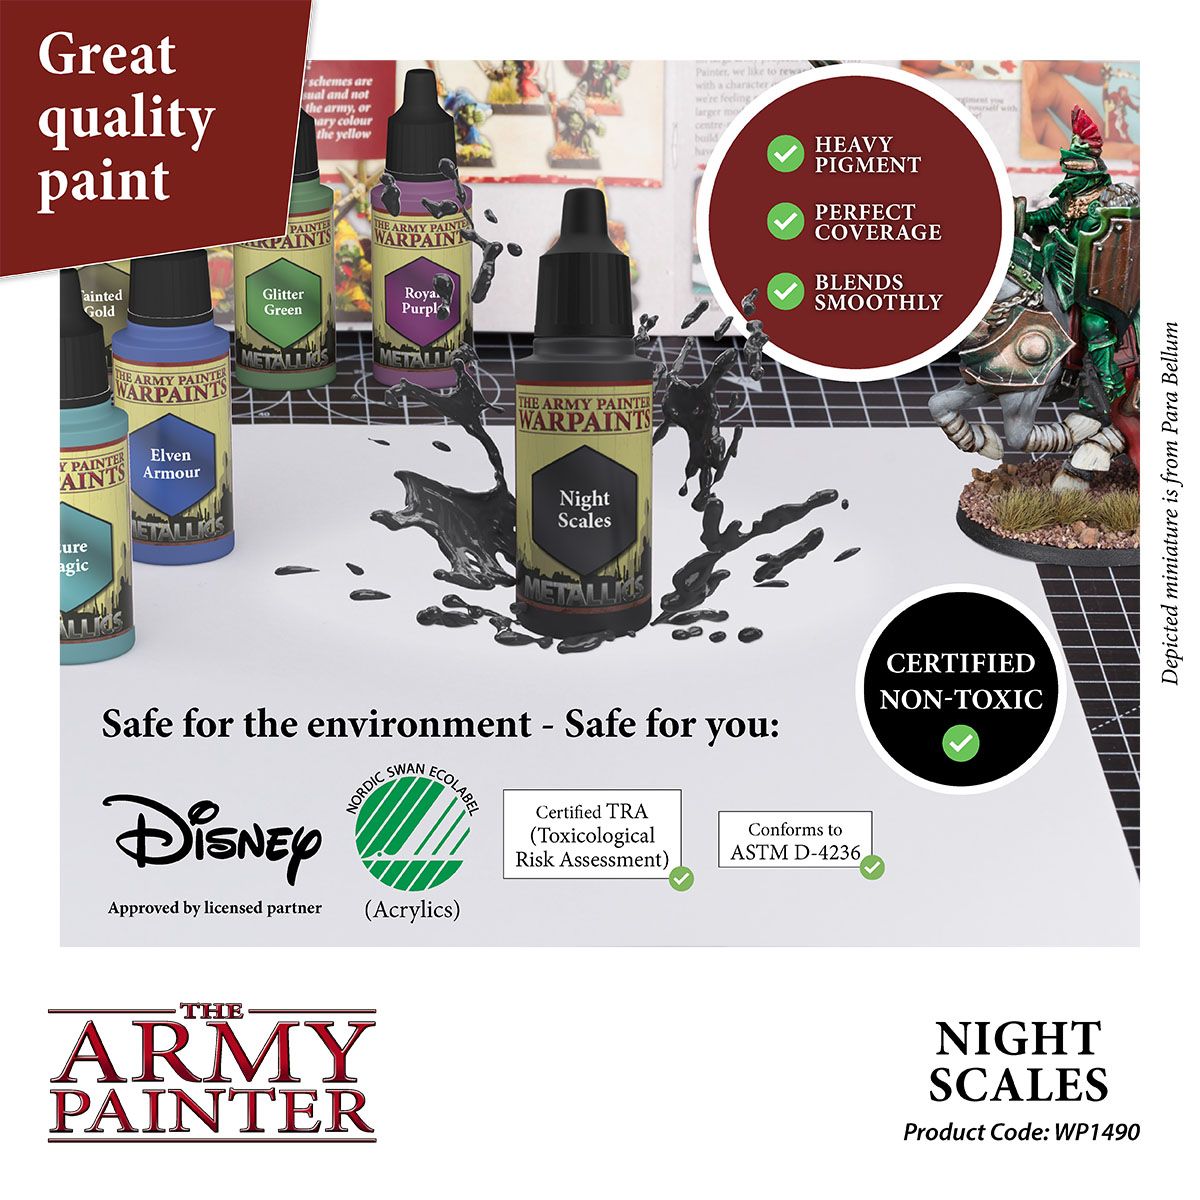 The Army Painter - Warpaints Air Acrylics – Wargames Delivered